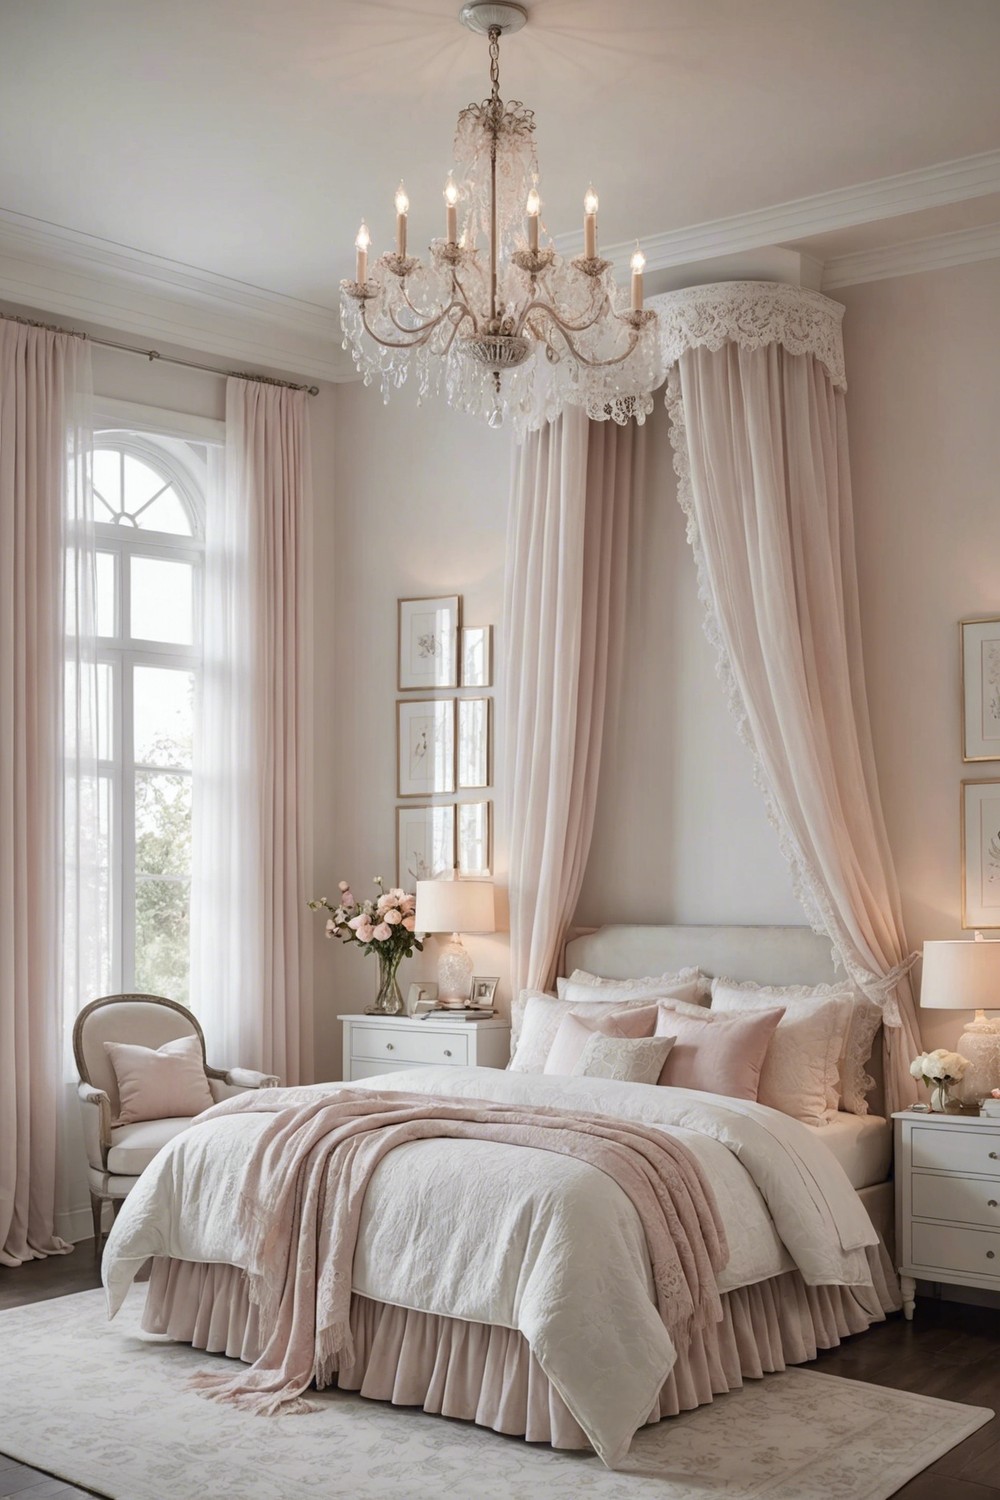 Soft Romance: White Bedroom with Blush and Lace